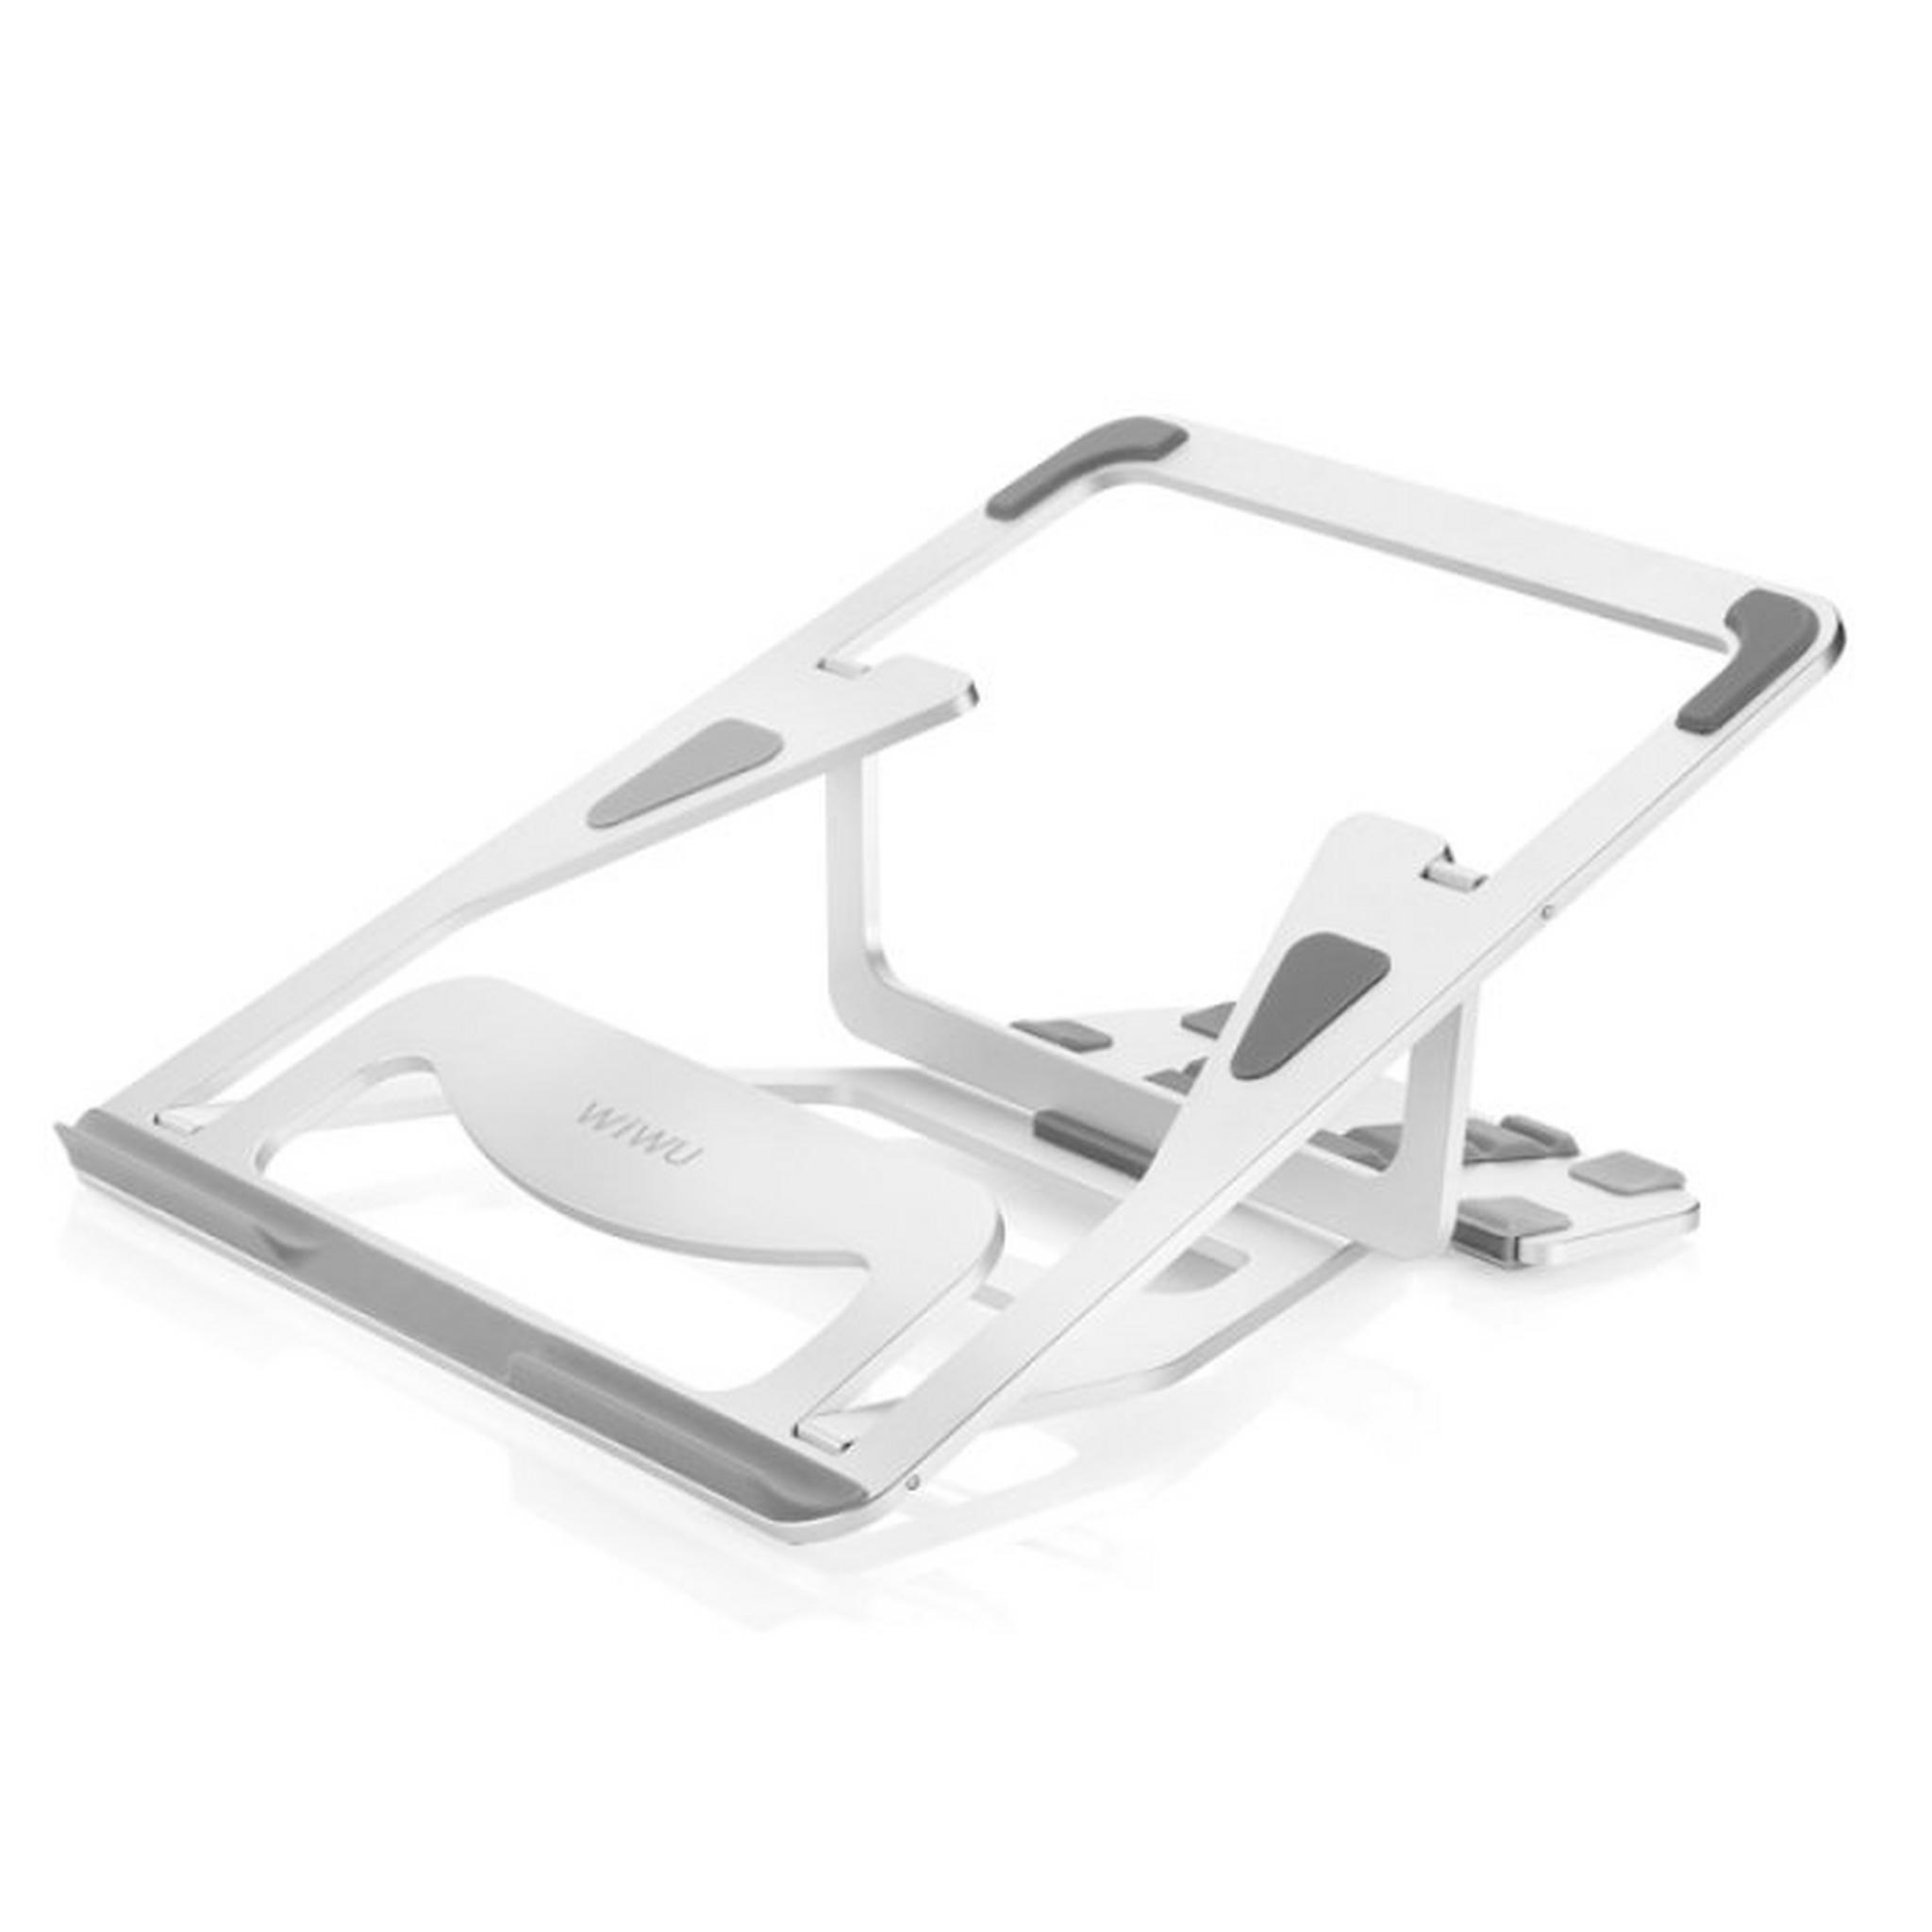 Wiwu S100 Loha Stand for 11.6 to 15.4 inch Laptops/MacBooks - Silver